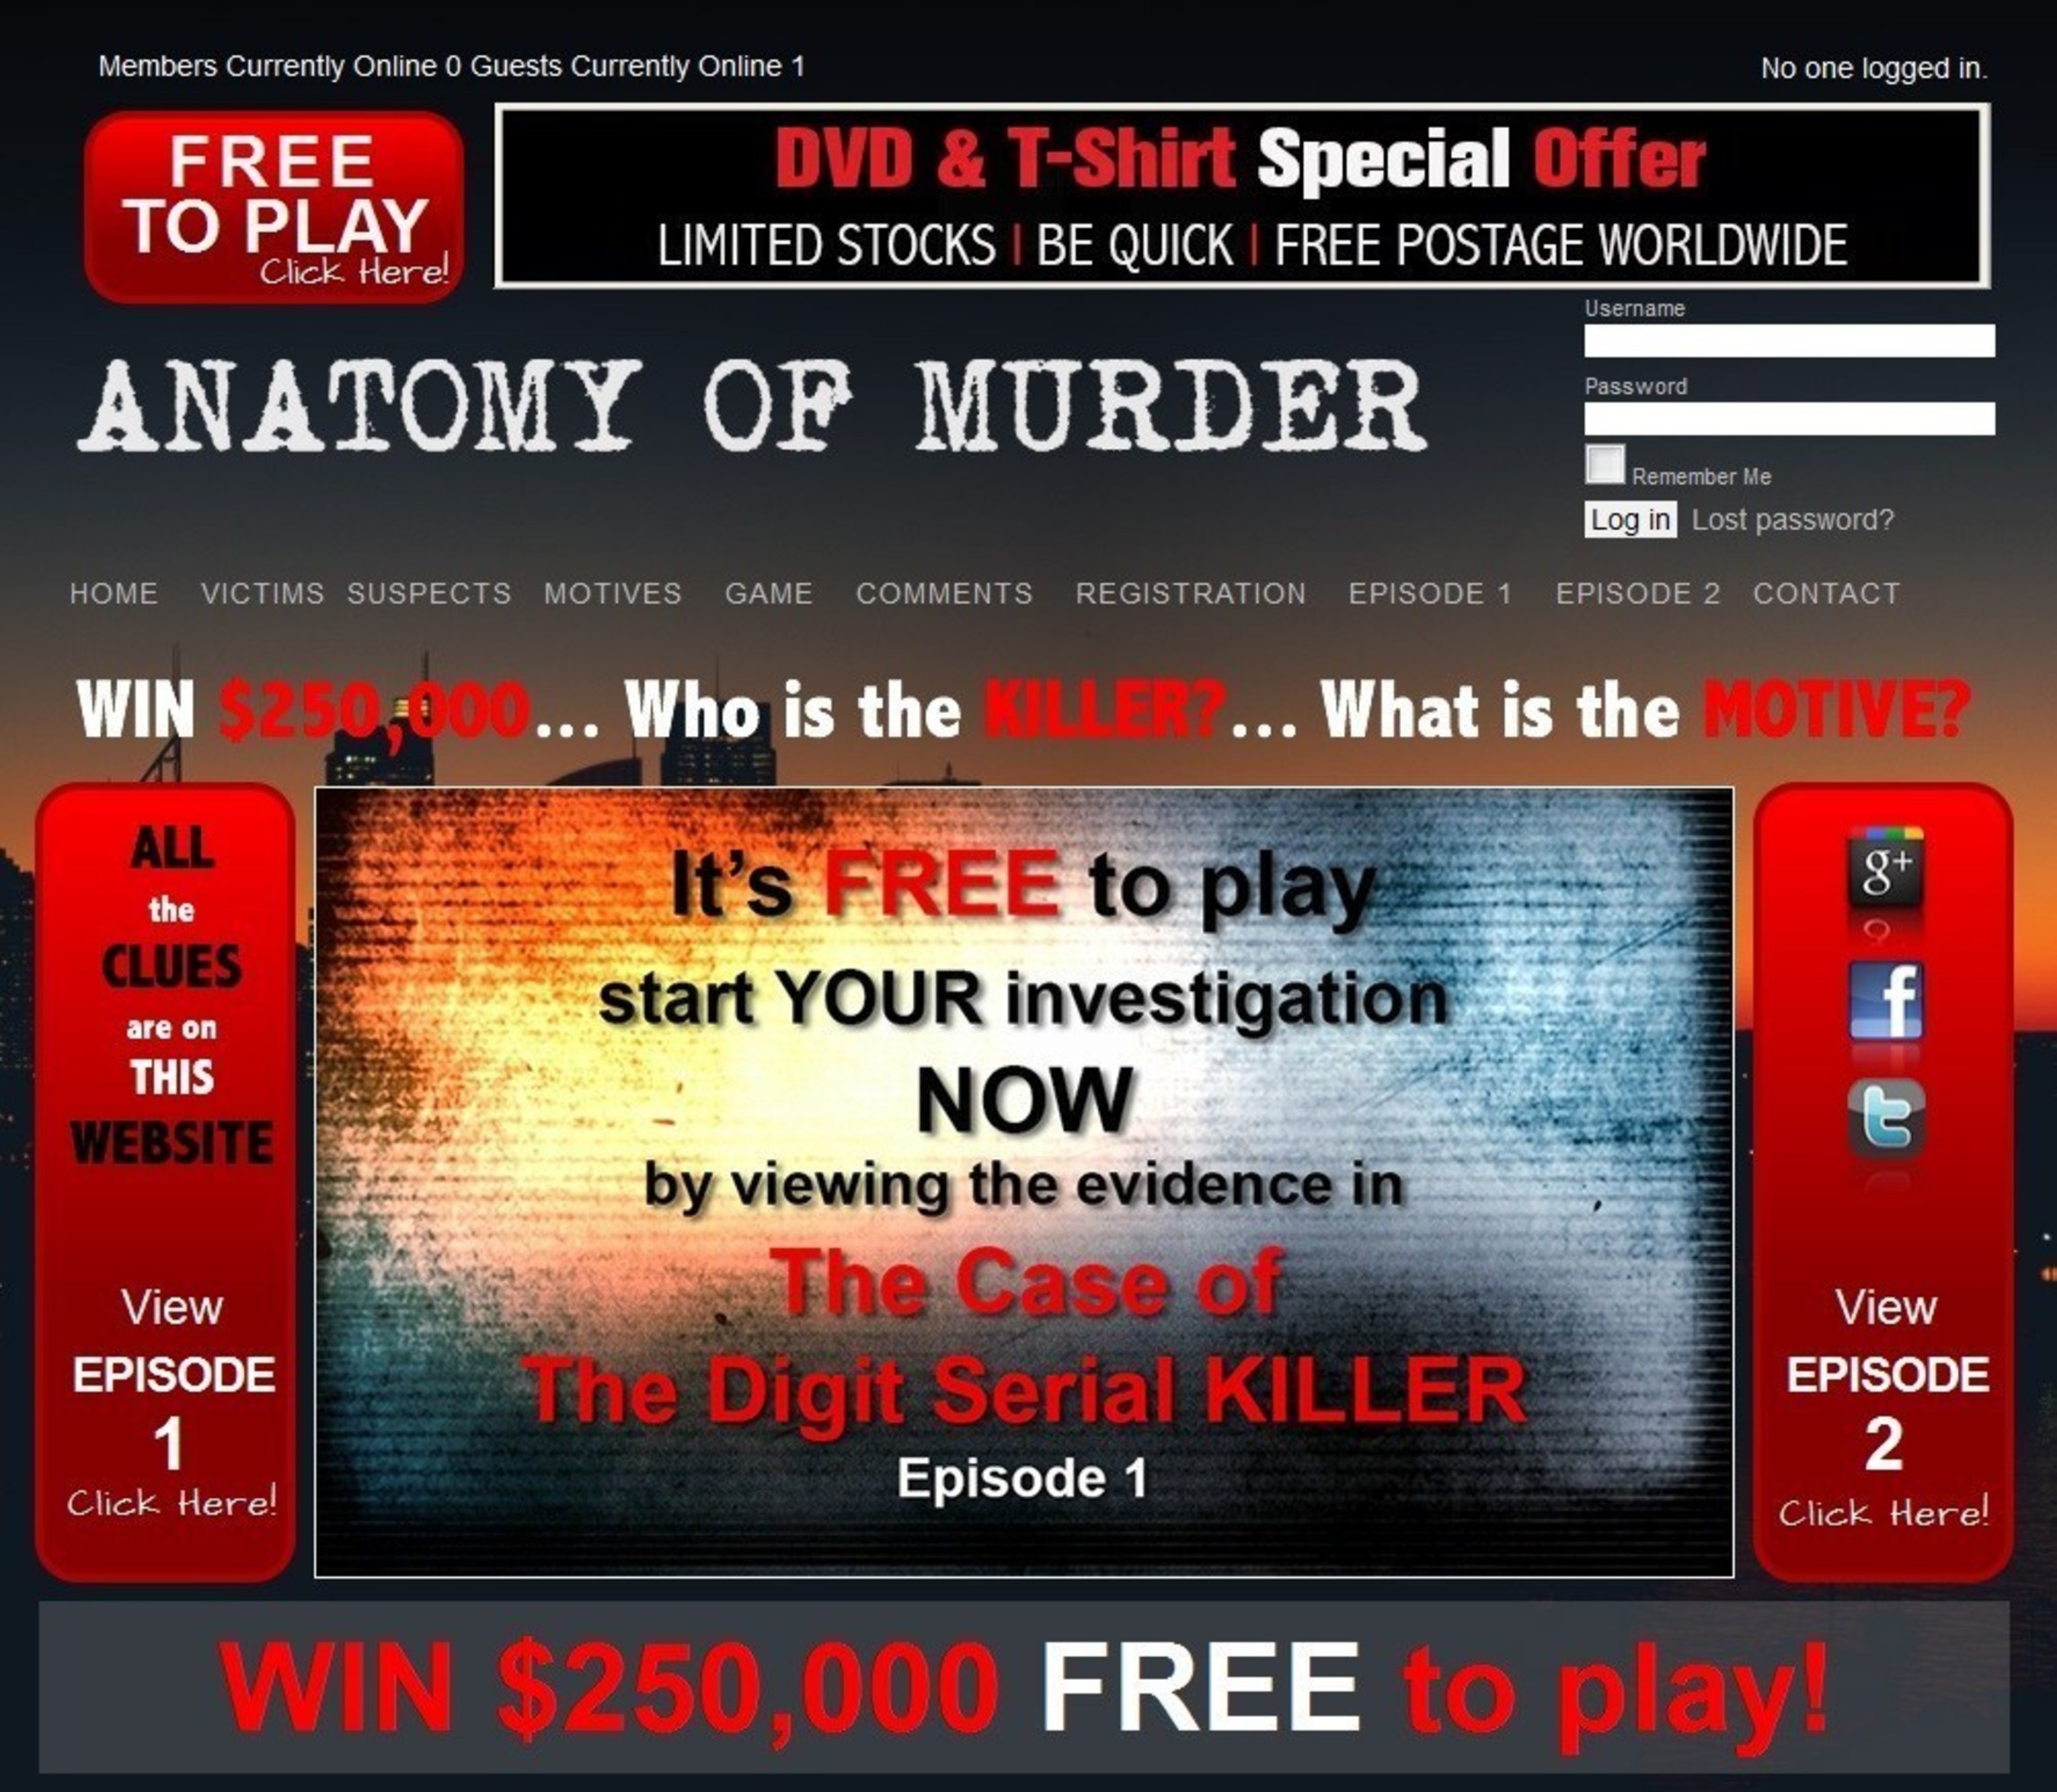 Win $250,000 in a World First Online Murder Mystery Game